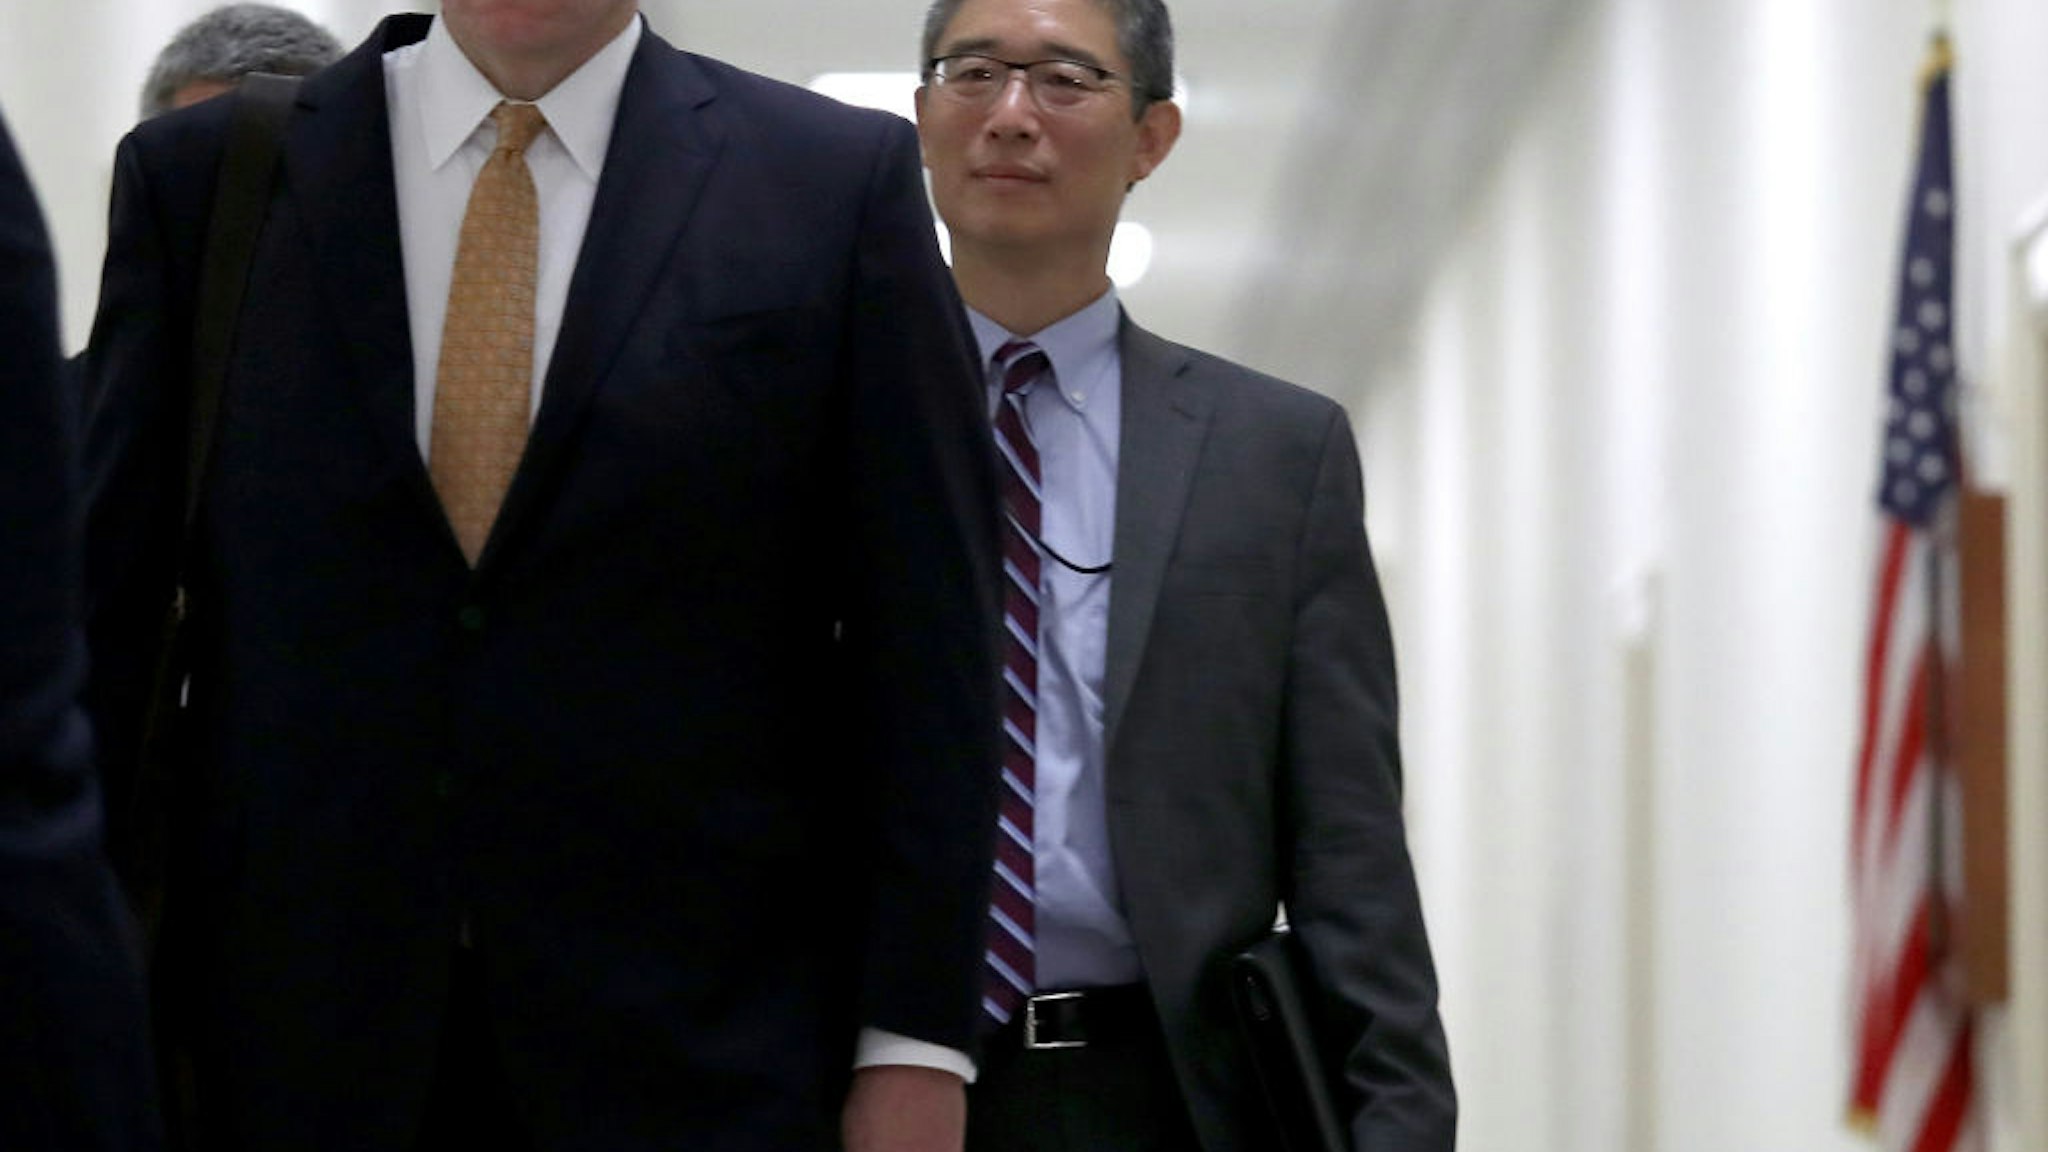 Bruce Ohr (R), former U.S. associate deputy attorney general, arrives for a closed hearing with the House Judiciary and House Oversight and Government Reform Committees on Capitol Hill on August 28, 2018 in Washington, DC. Ohr is expected to be questioned